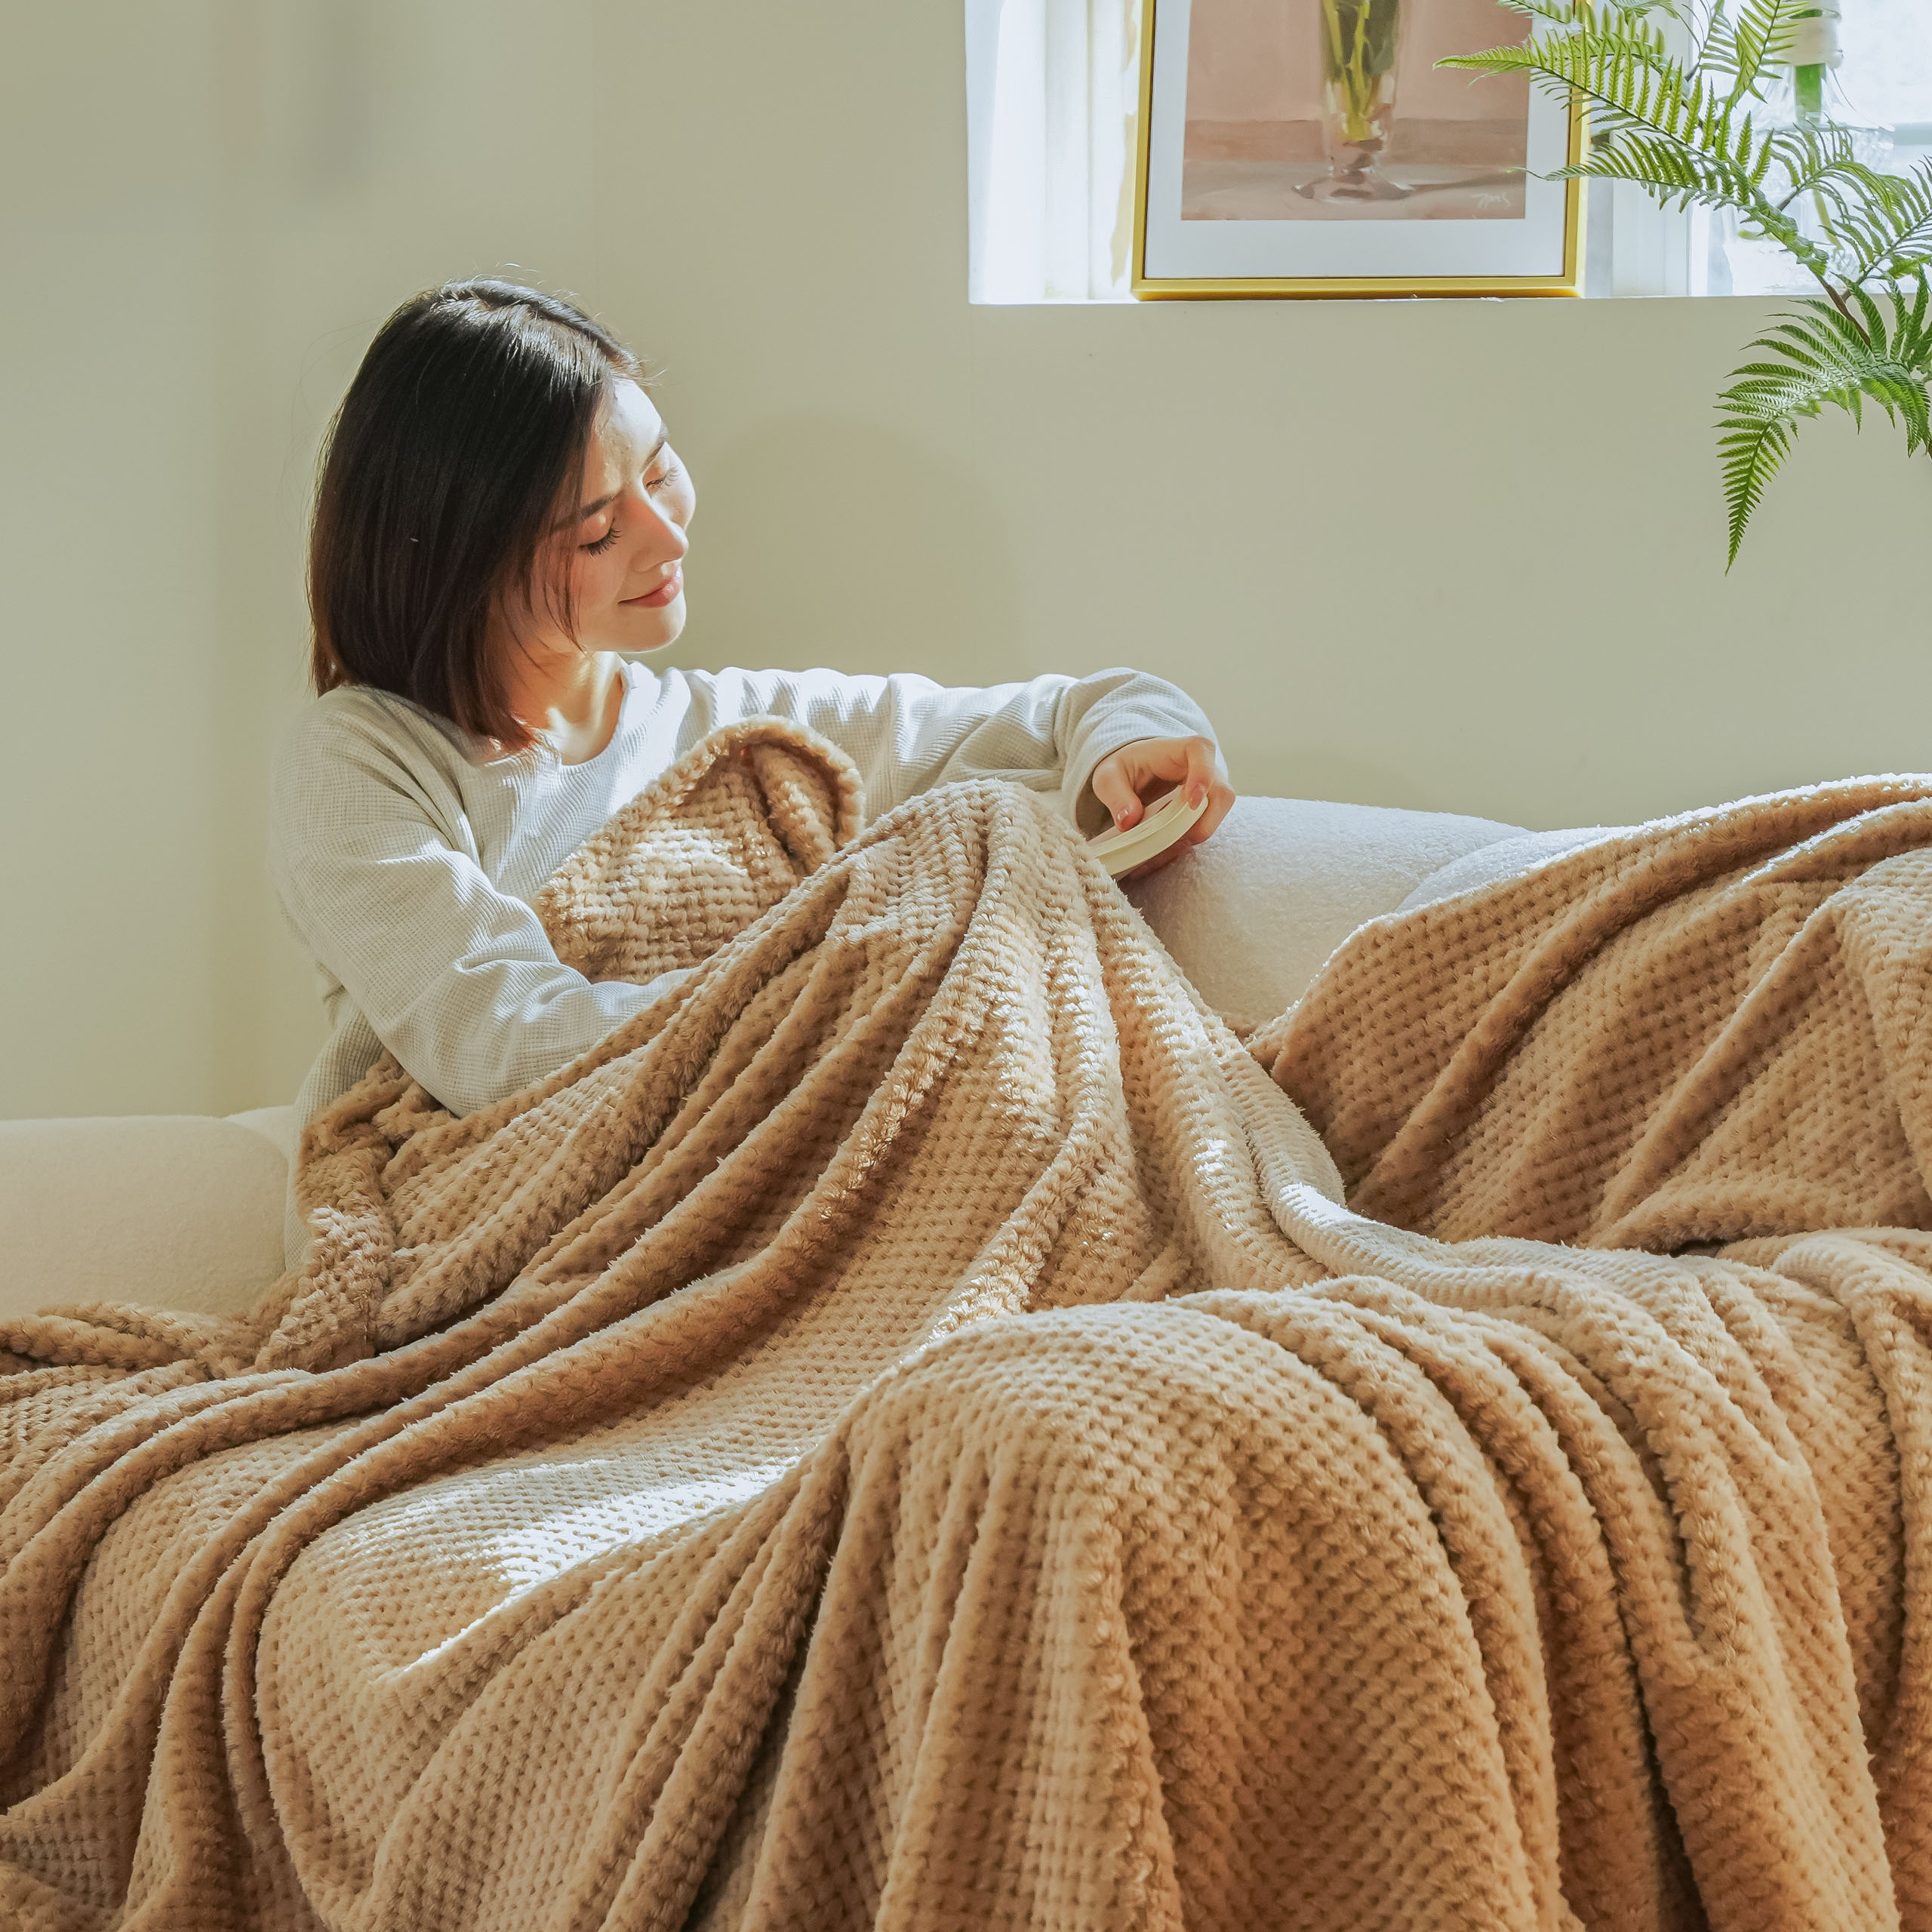 High Quality Textiles: The Secret to Keeping Your Skin Healthy While You Sleep